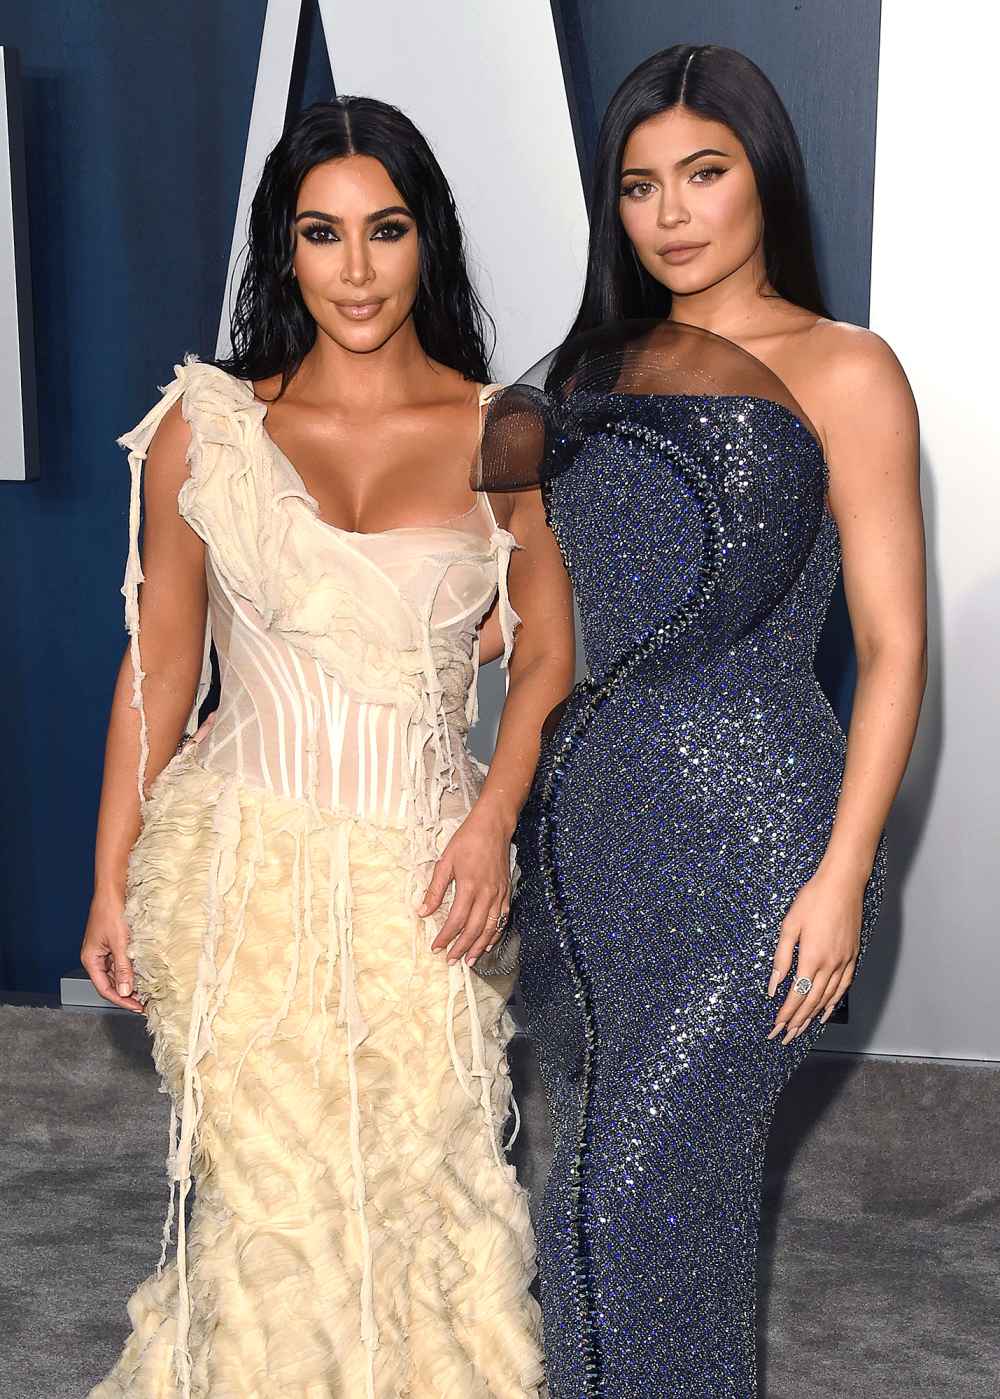 Kim Kardashian Gives Birth to Kylie Jenner in Leaked Kanye West and Tyga ‘Feel Me’ Video